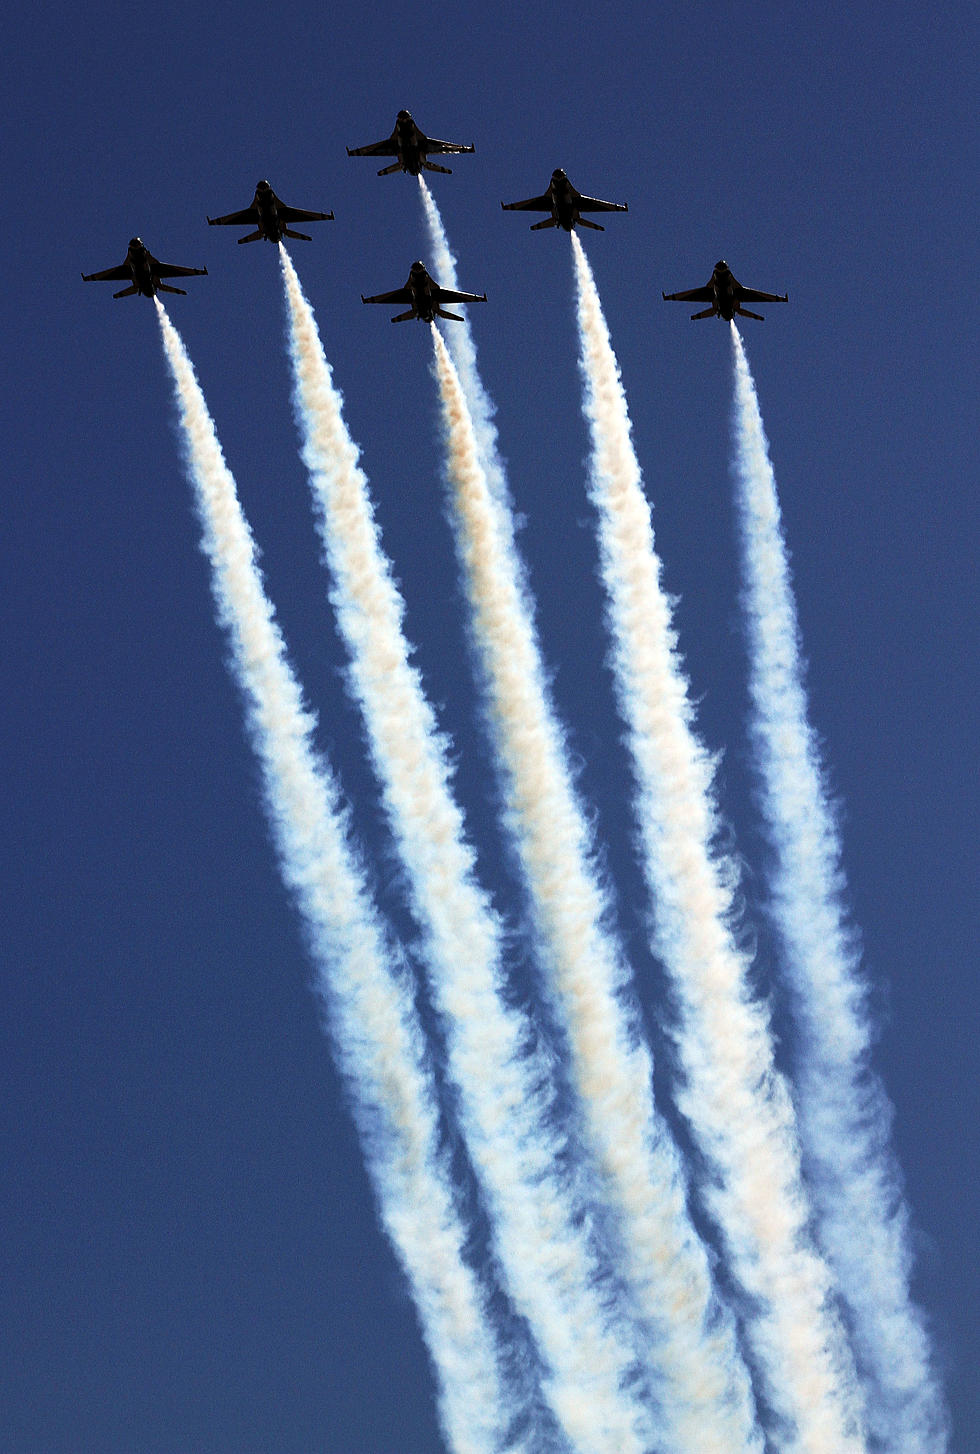 Thunderbirds to Resume Training, Appearance at Cheyenne Frontier Days 2013 Still Canceled